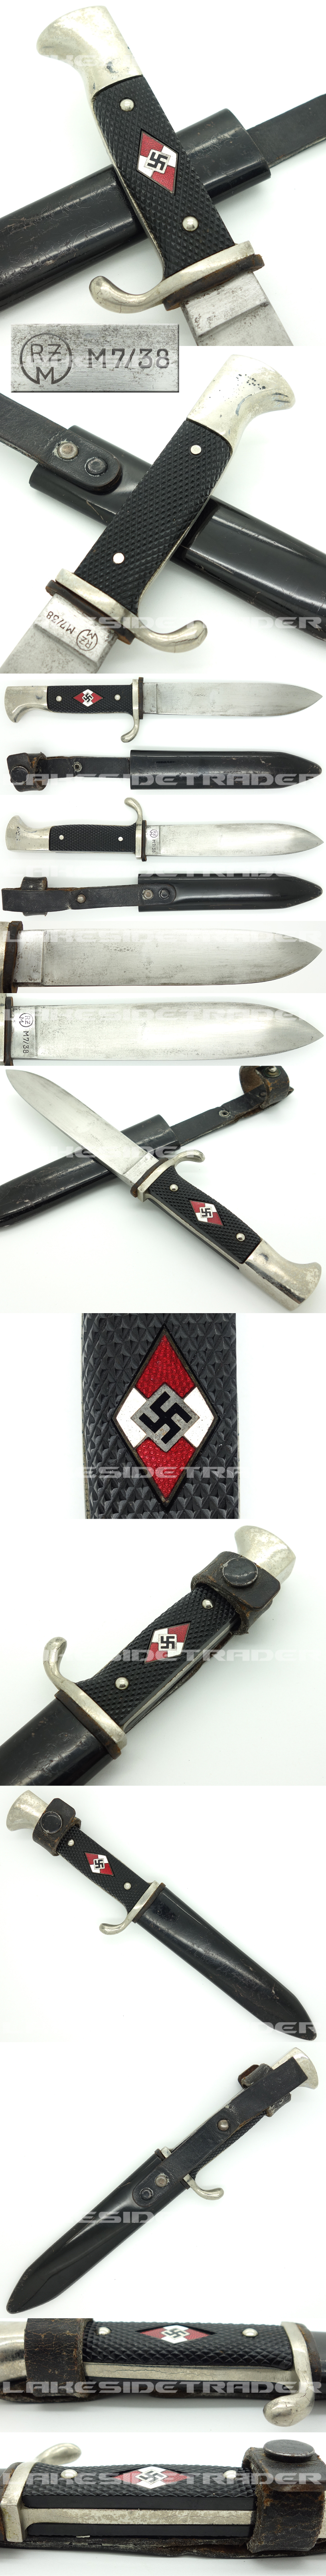 Hitler Youth Knife by RZM M7/38